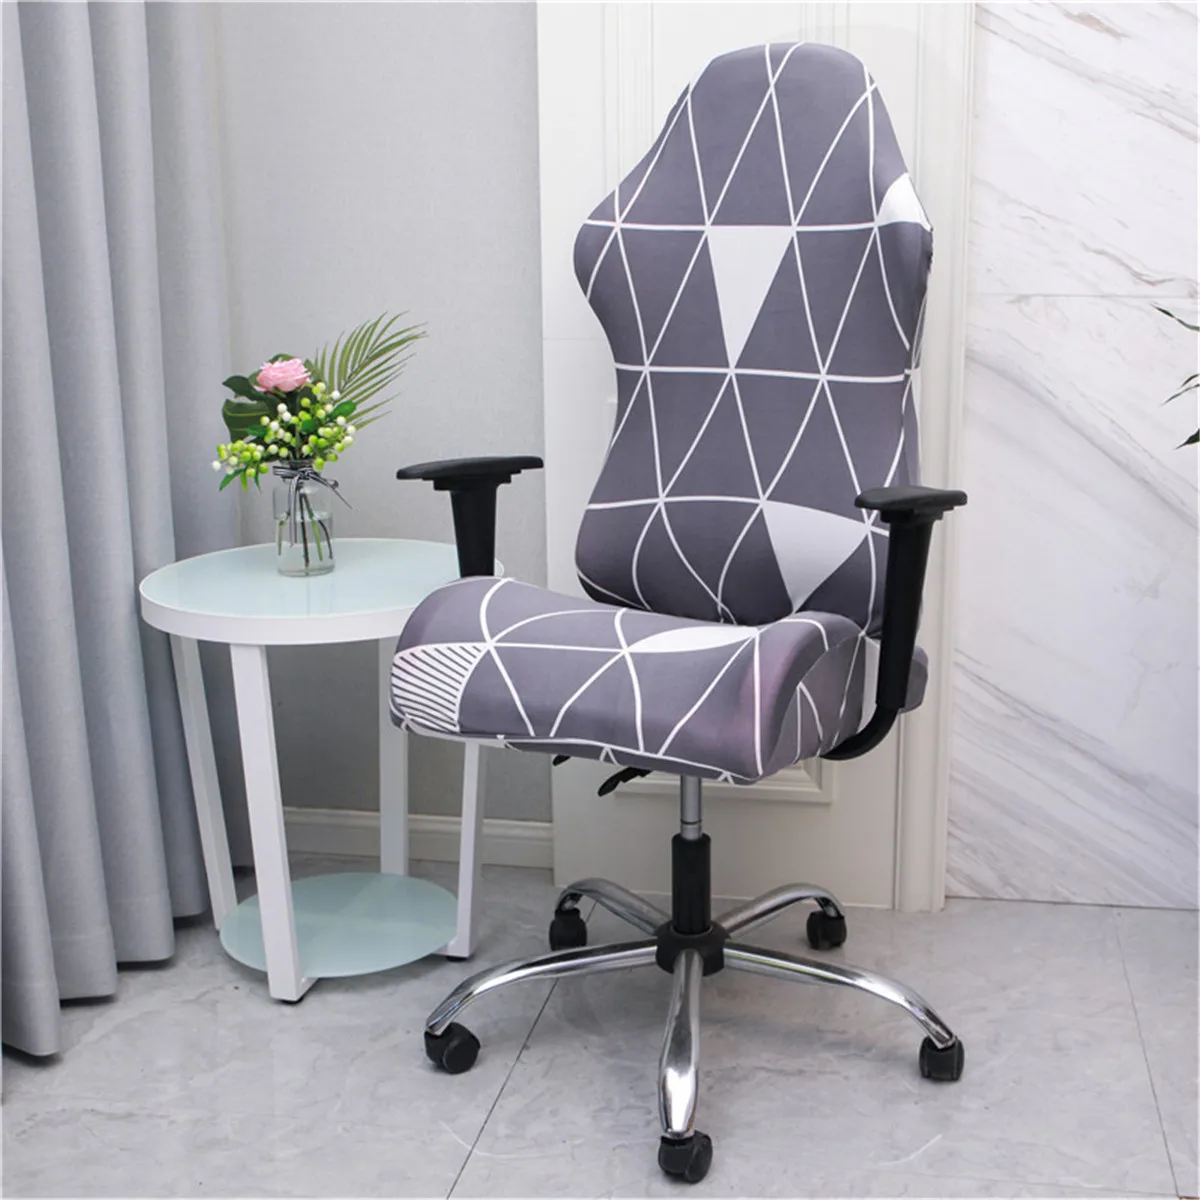 

2PCS/Set Gaming Chair Cover Removable Elastic Dustproof Computer Armchair Seat Slipcover Spandex Chair Cover +Backrest Cover